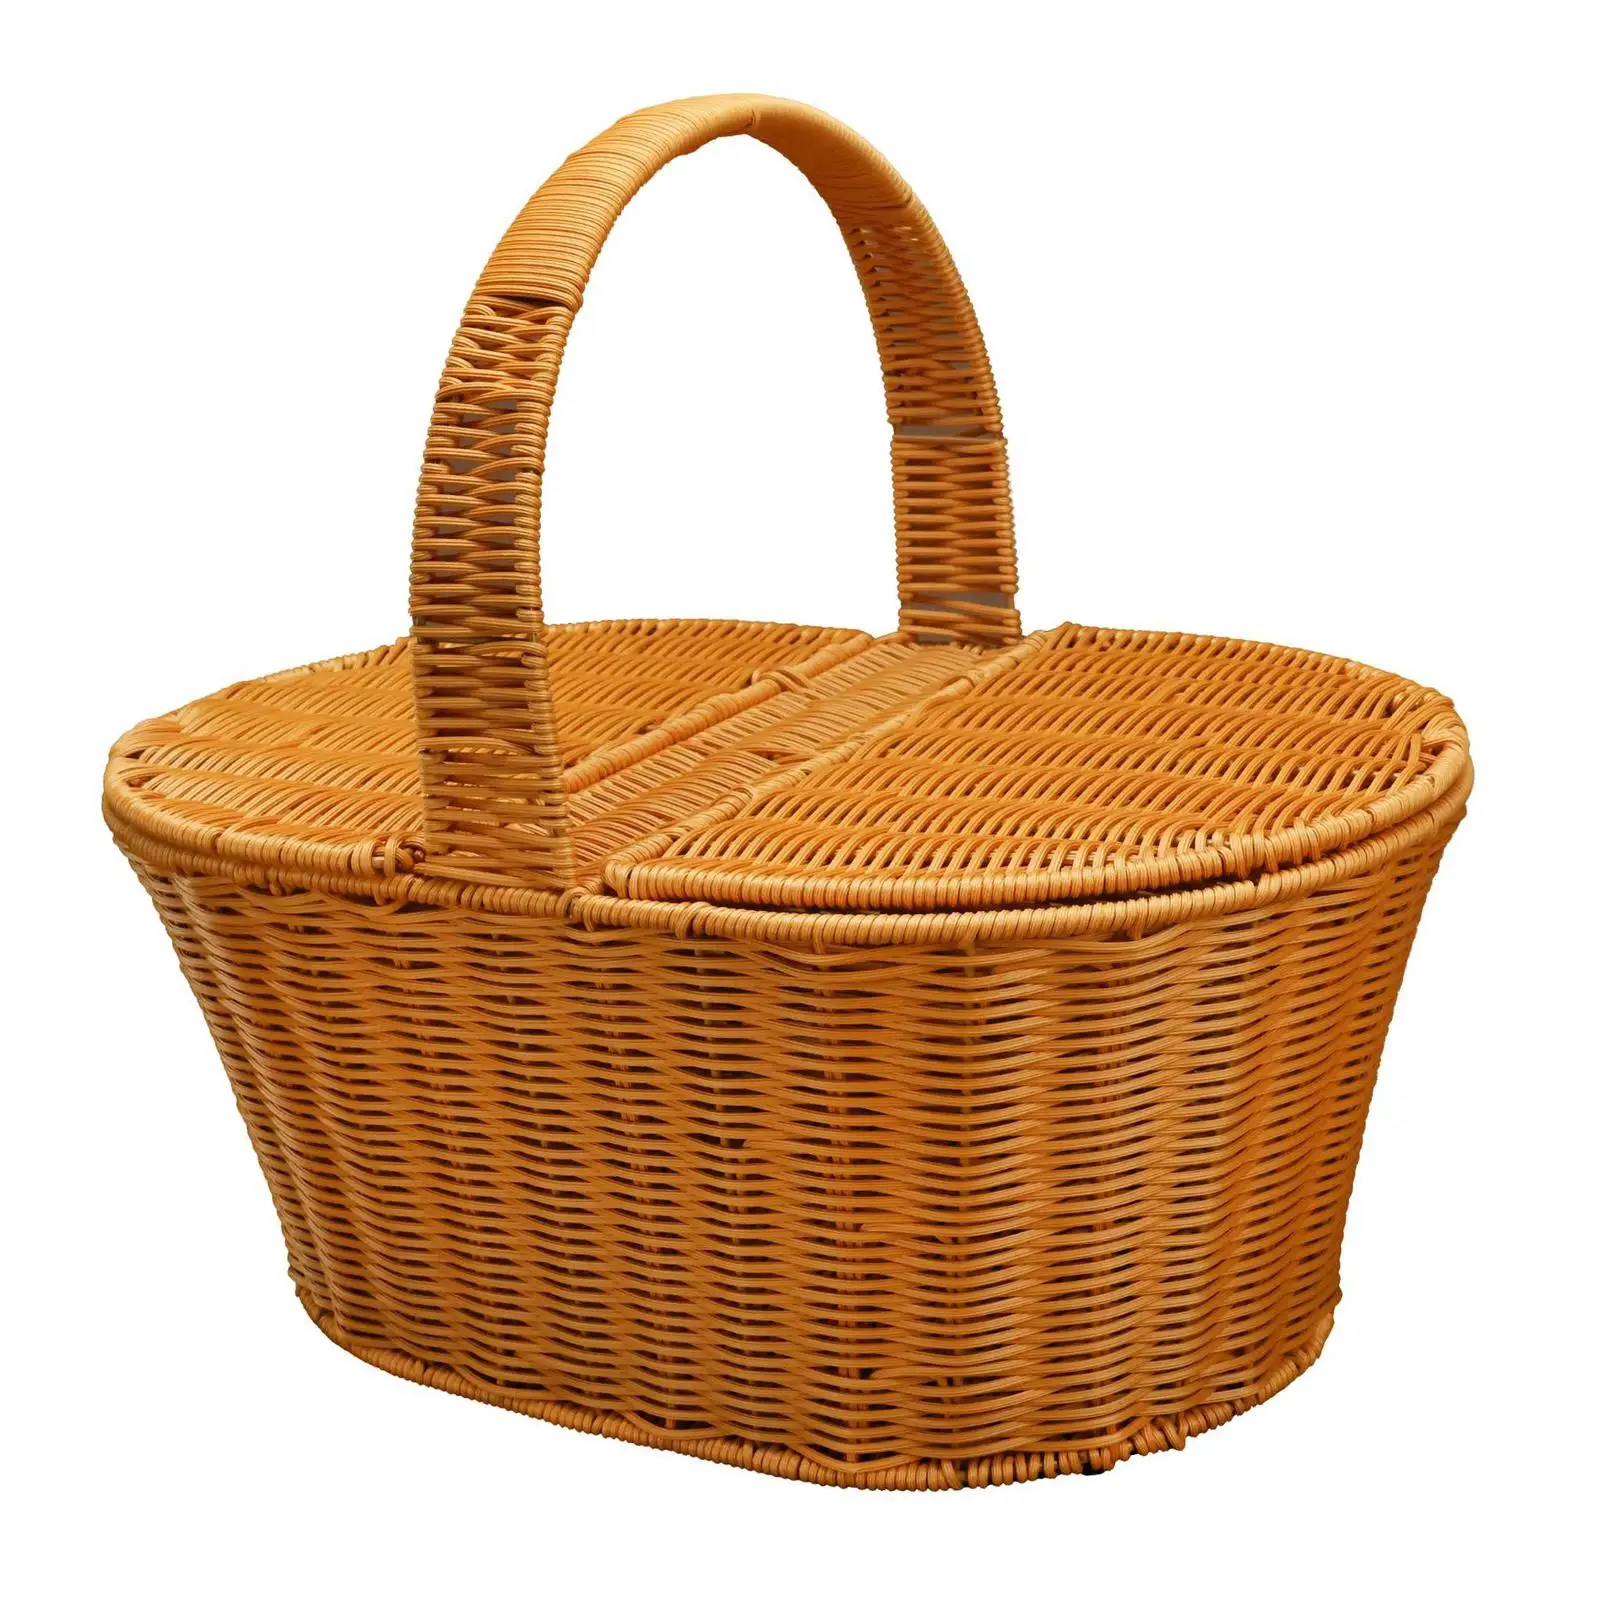 Hand Woven Basket Containers Nesting Basket Bin Fruits Storage Baskets Organizer for Picnic Shopping Pantry Cabinet Bathroom